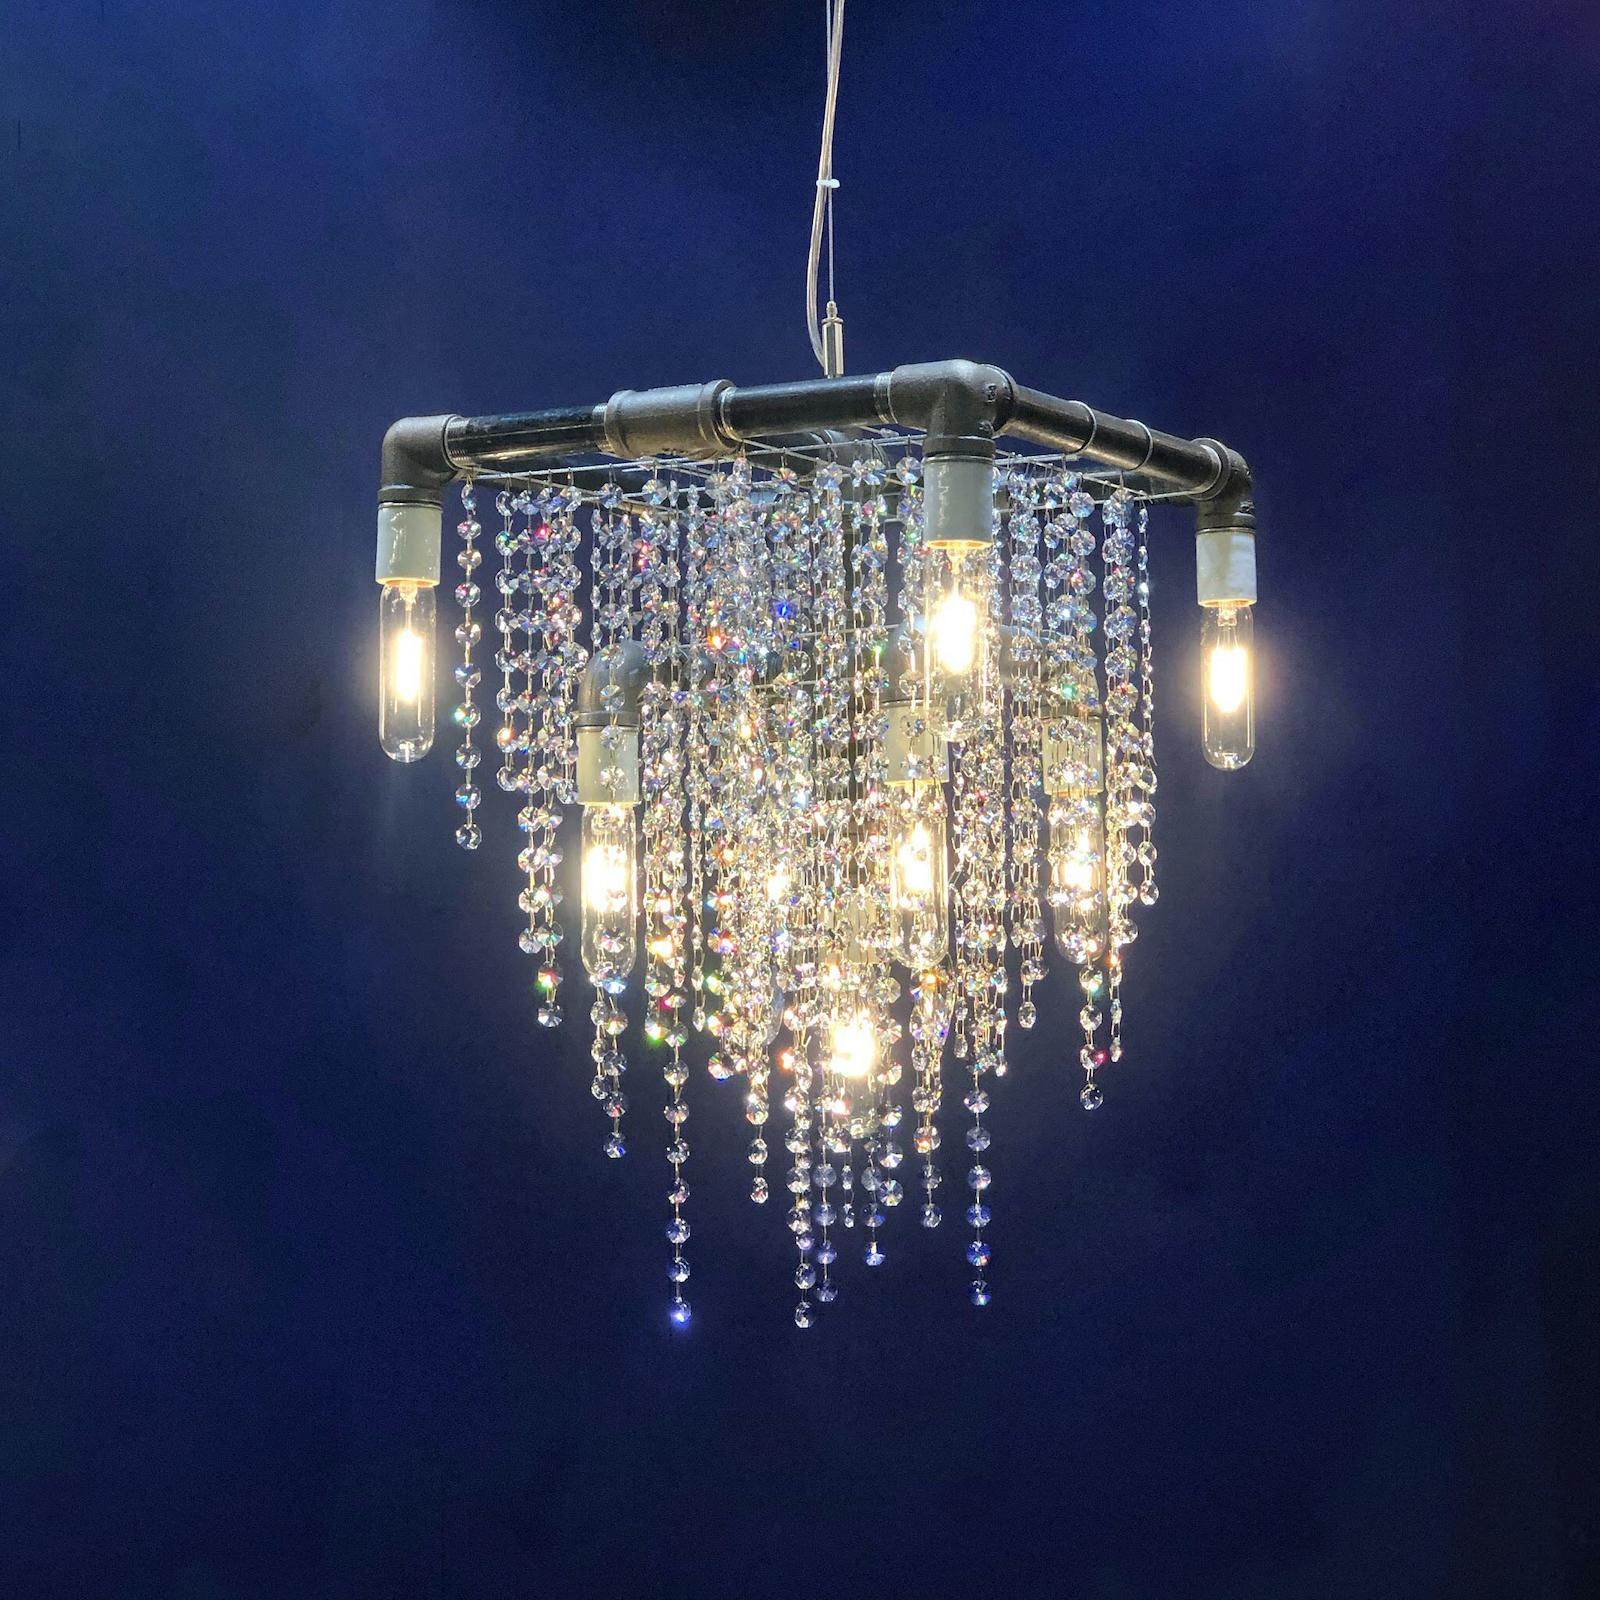 industrial pendant light with crystals